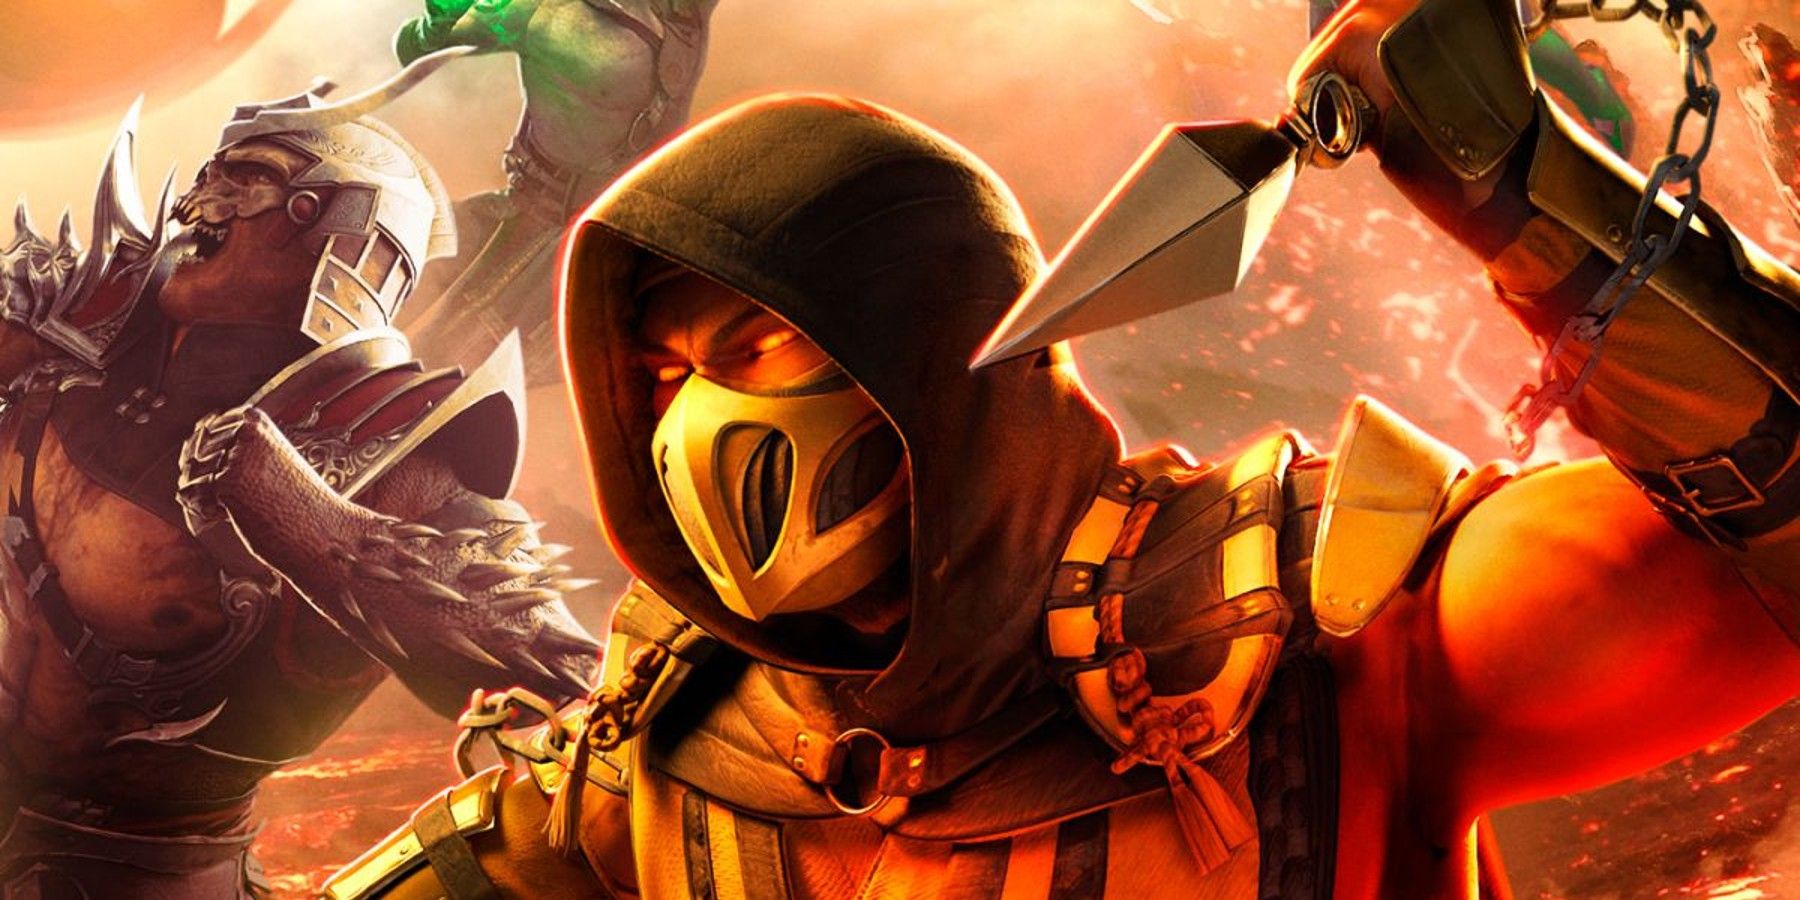 Mortal Kombat: Onslaught is a new mobile RPG coming next year